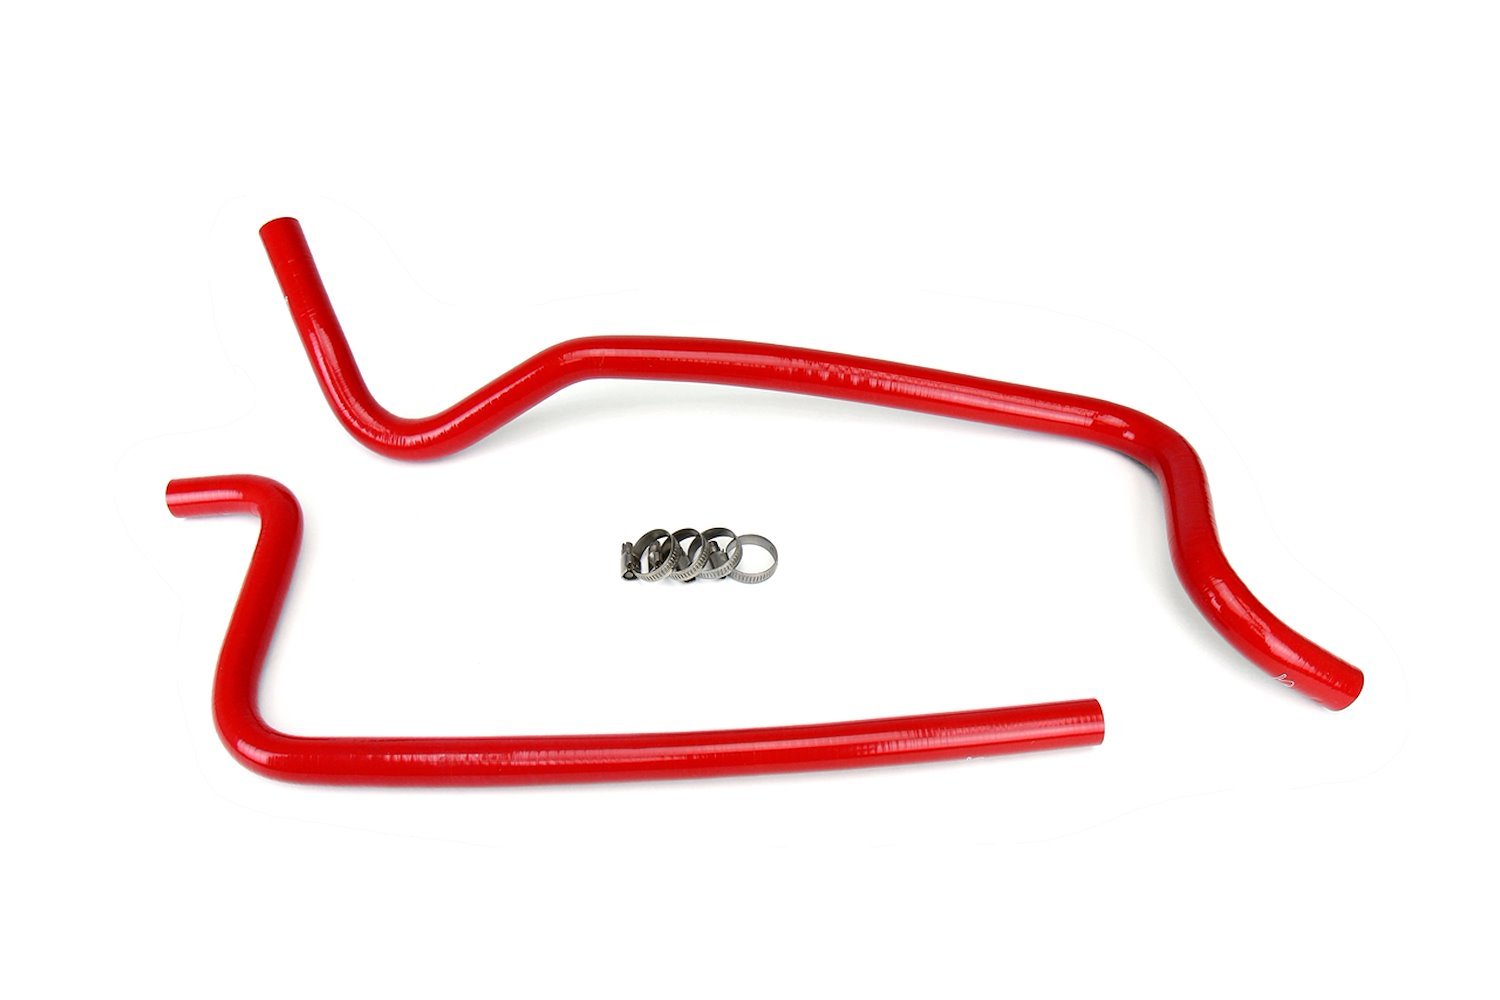 57-1283-RED Heater Hose Kit, High-Temp 3-Ply Reinforced Silicone, Replace OEM Rubber Heater Coolant Hoses